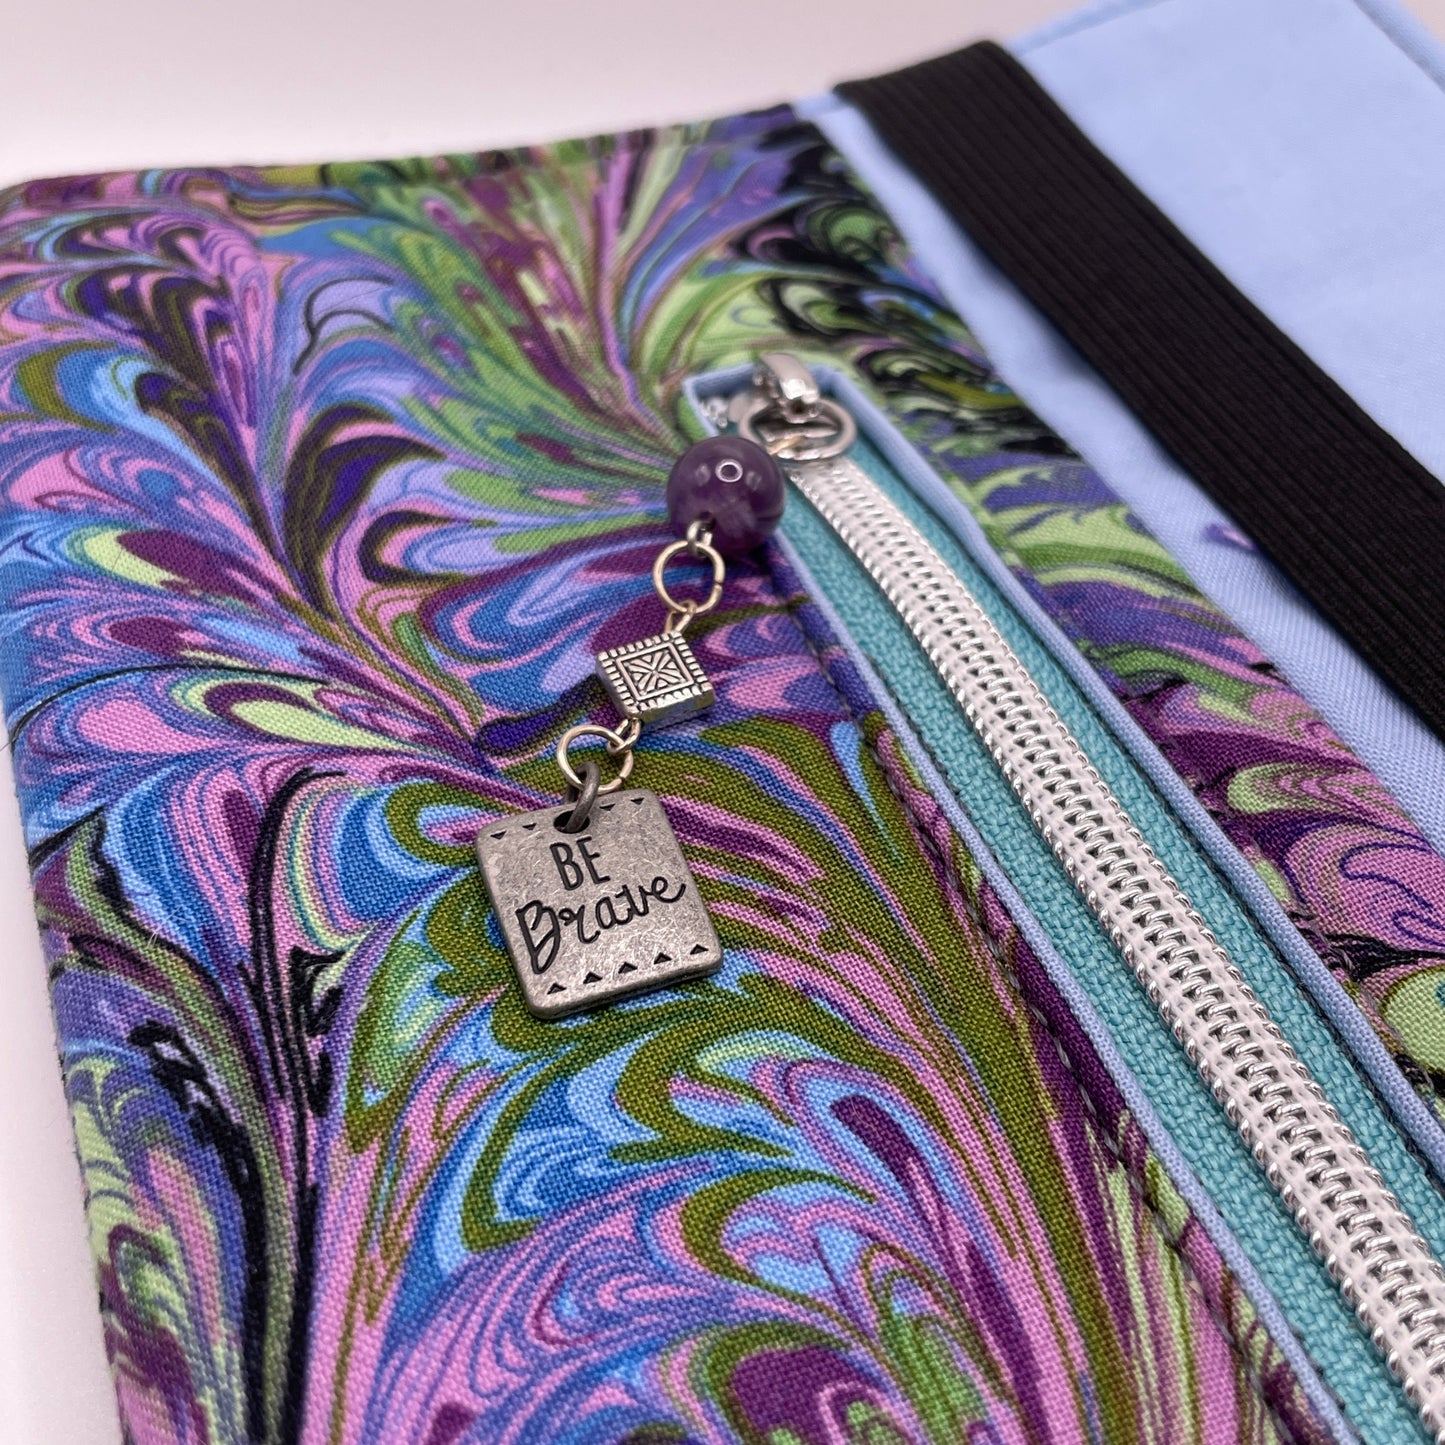 Cotton A5 Journal Covers with Zipper Pocket